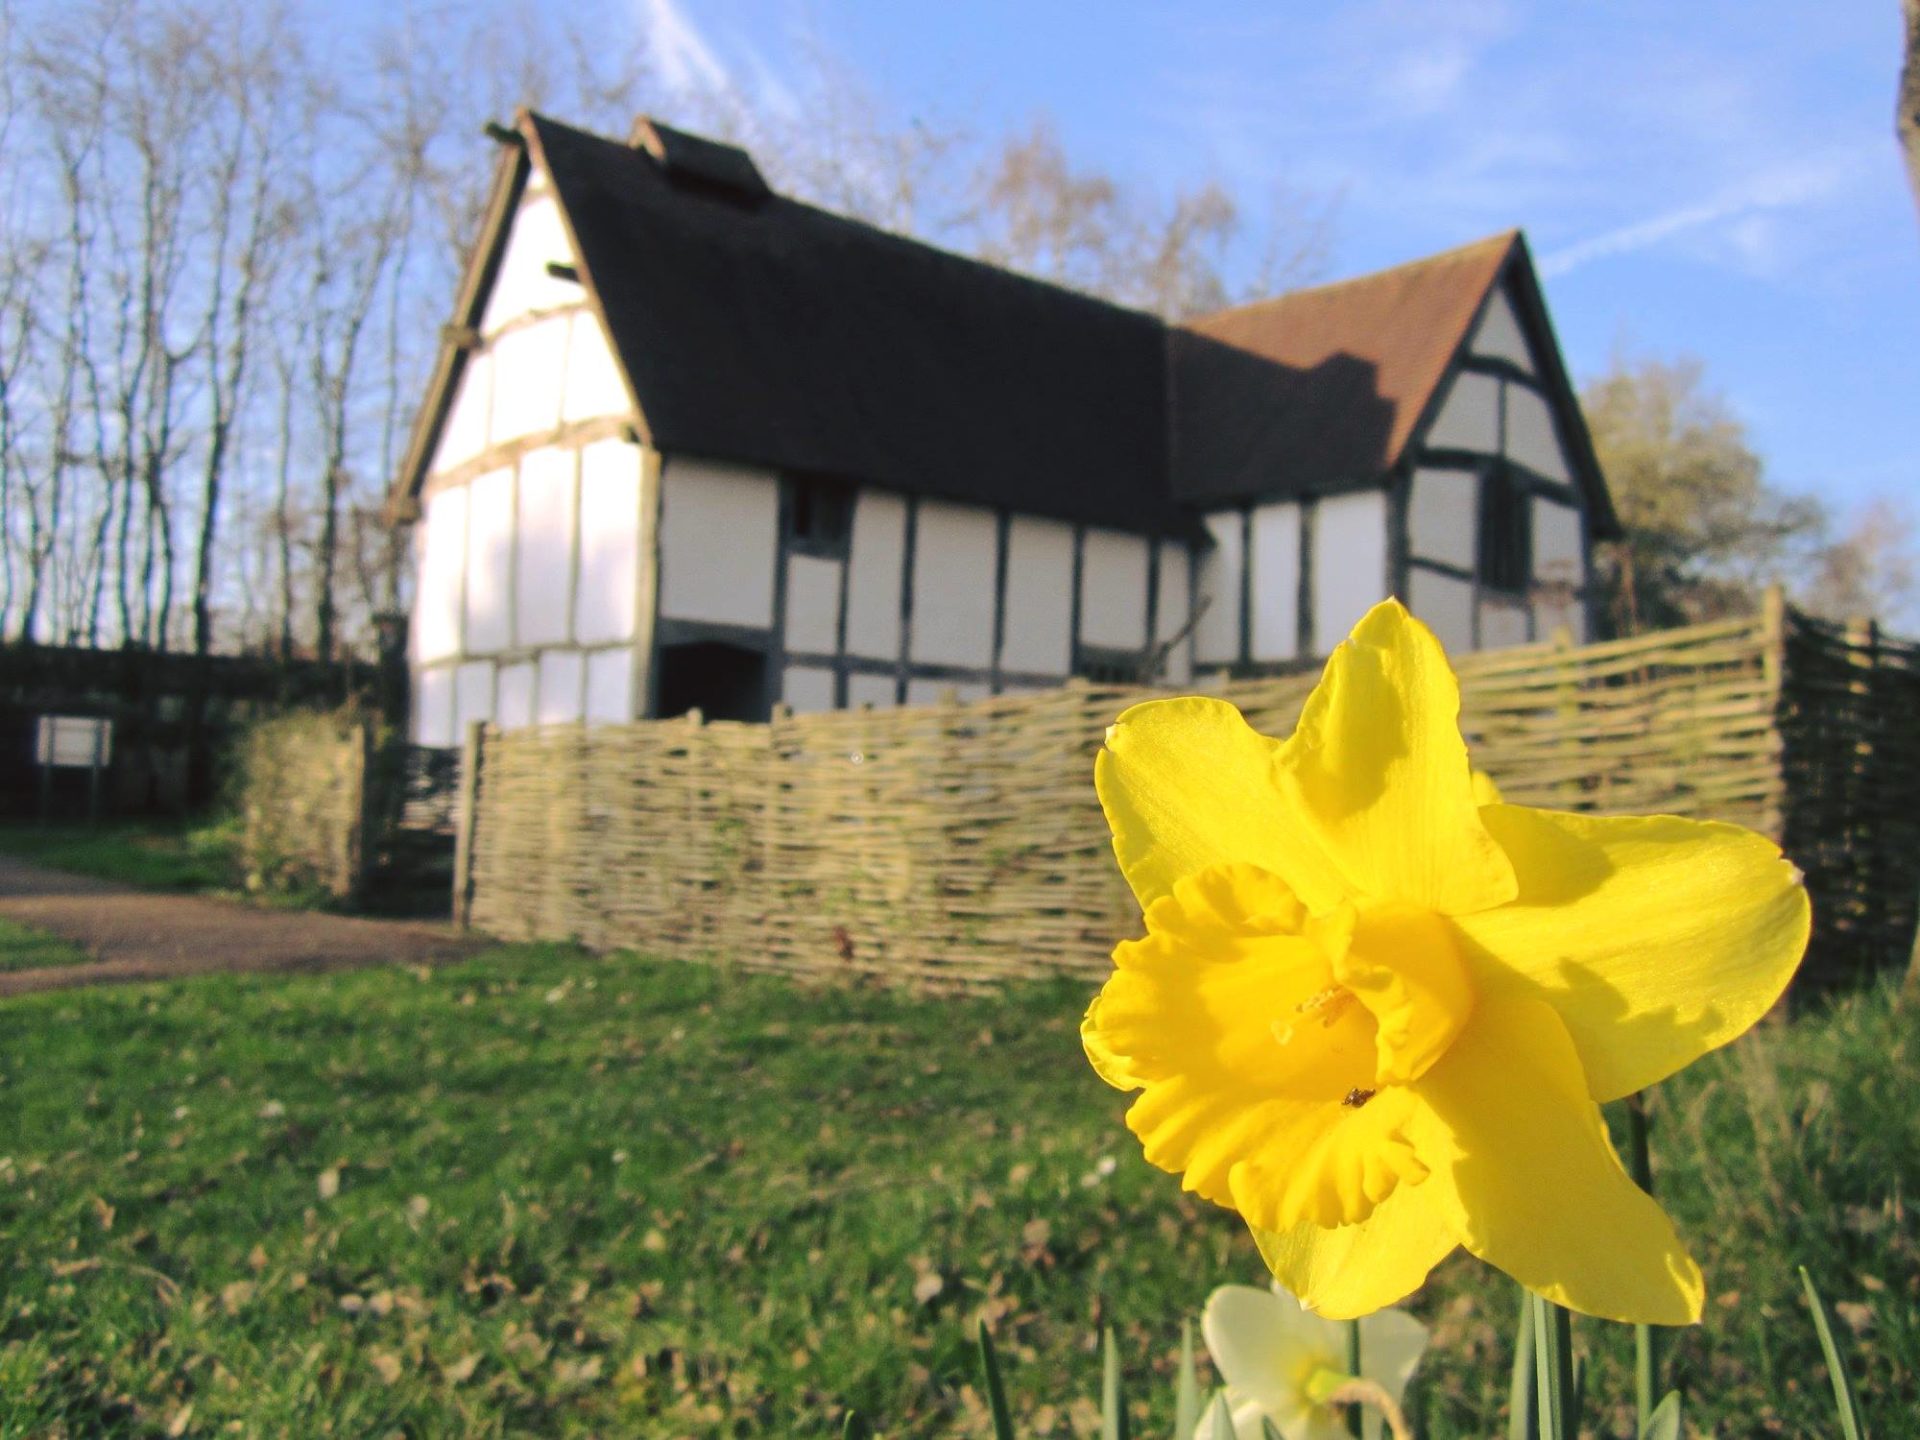 Plans to welcome visitors back to Avoncroft Museum in Summer 2021